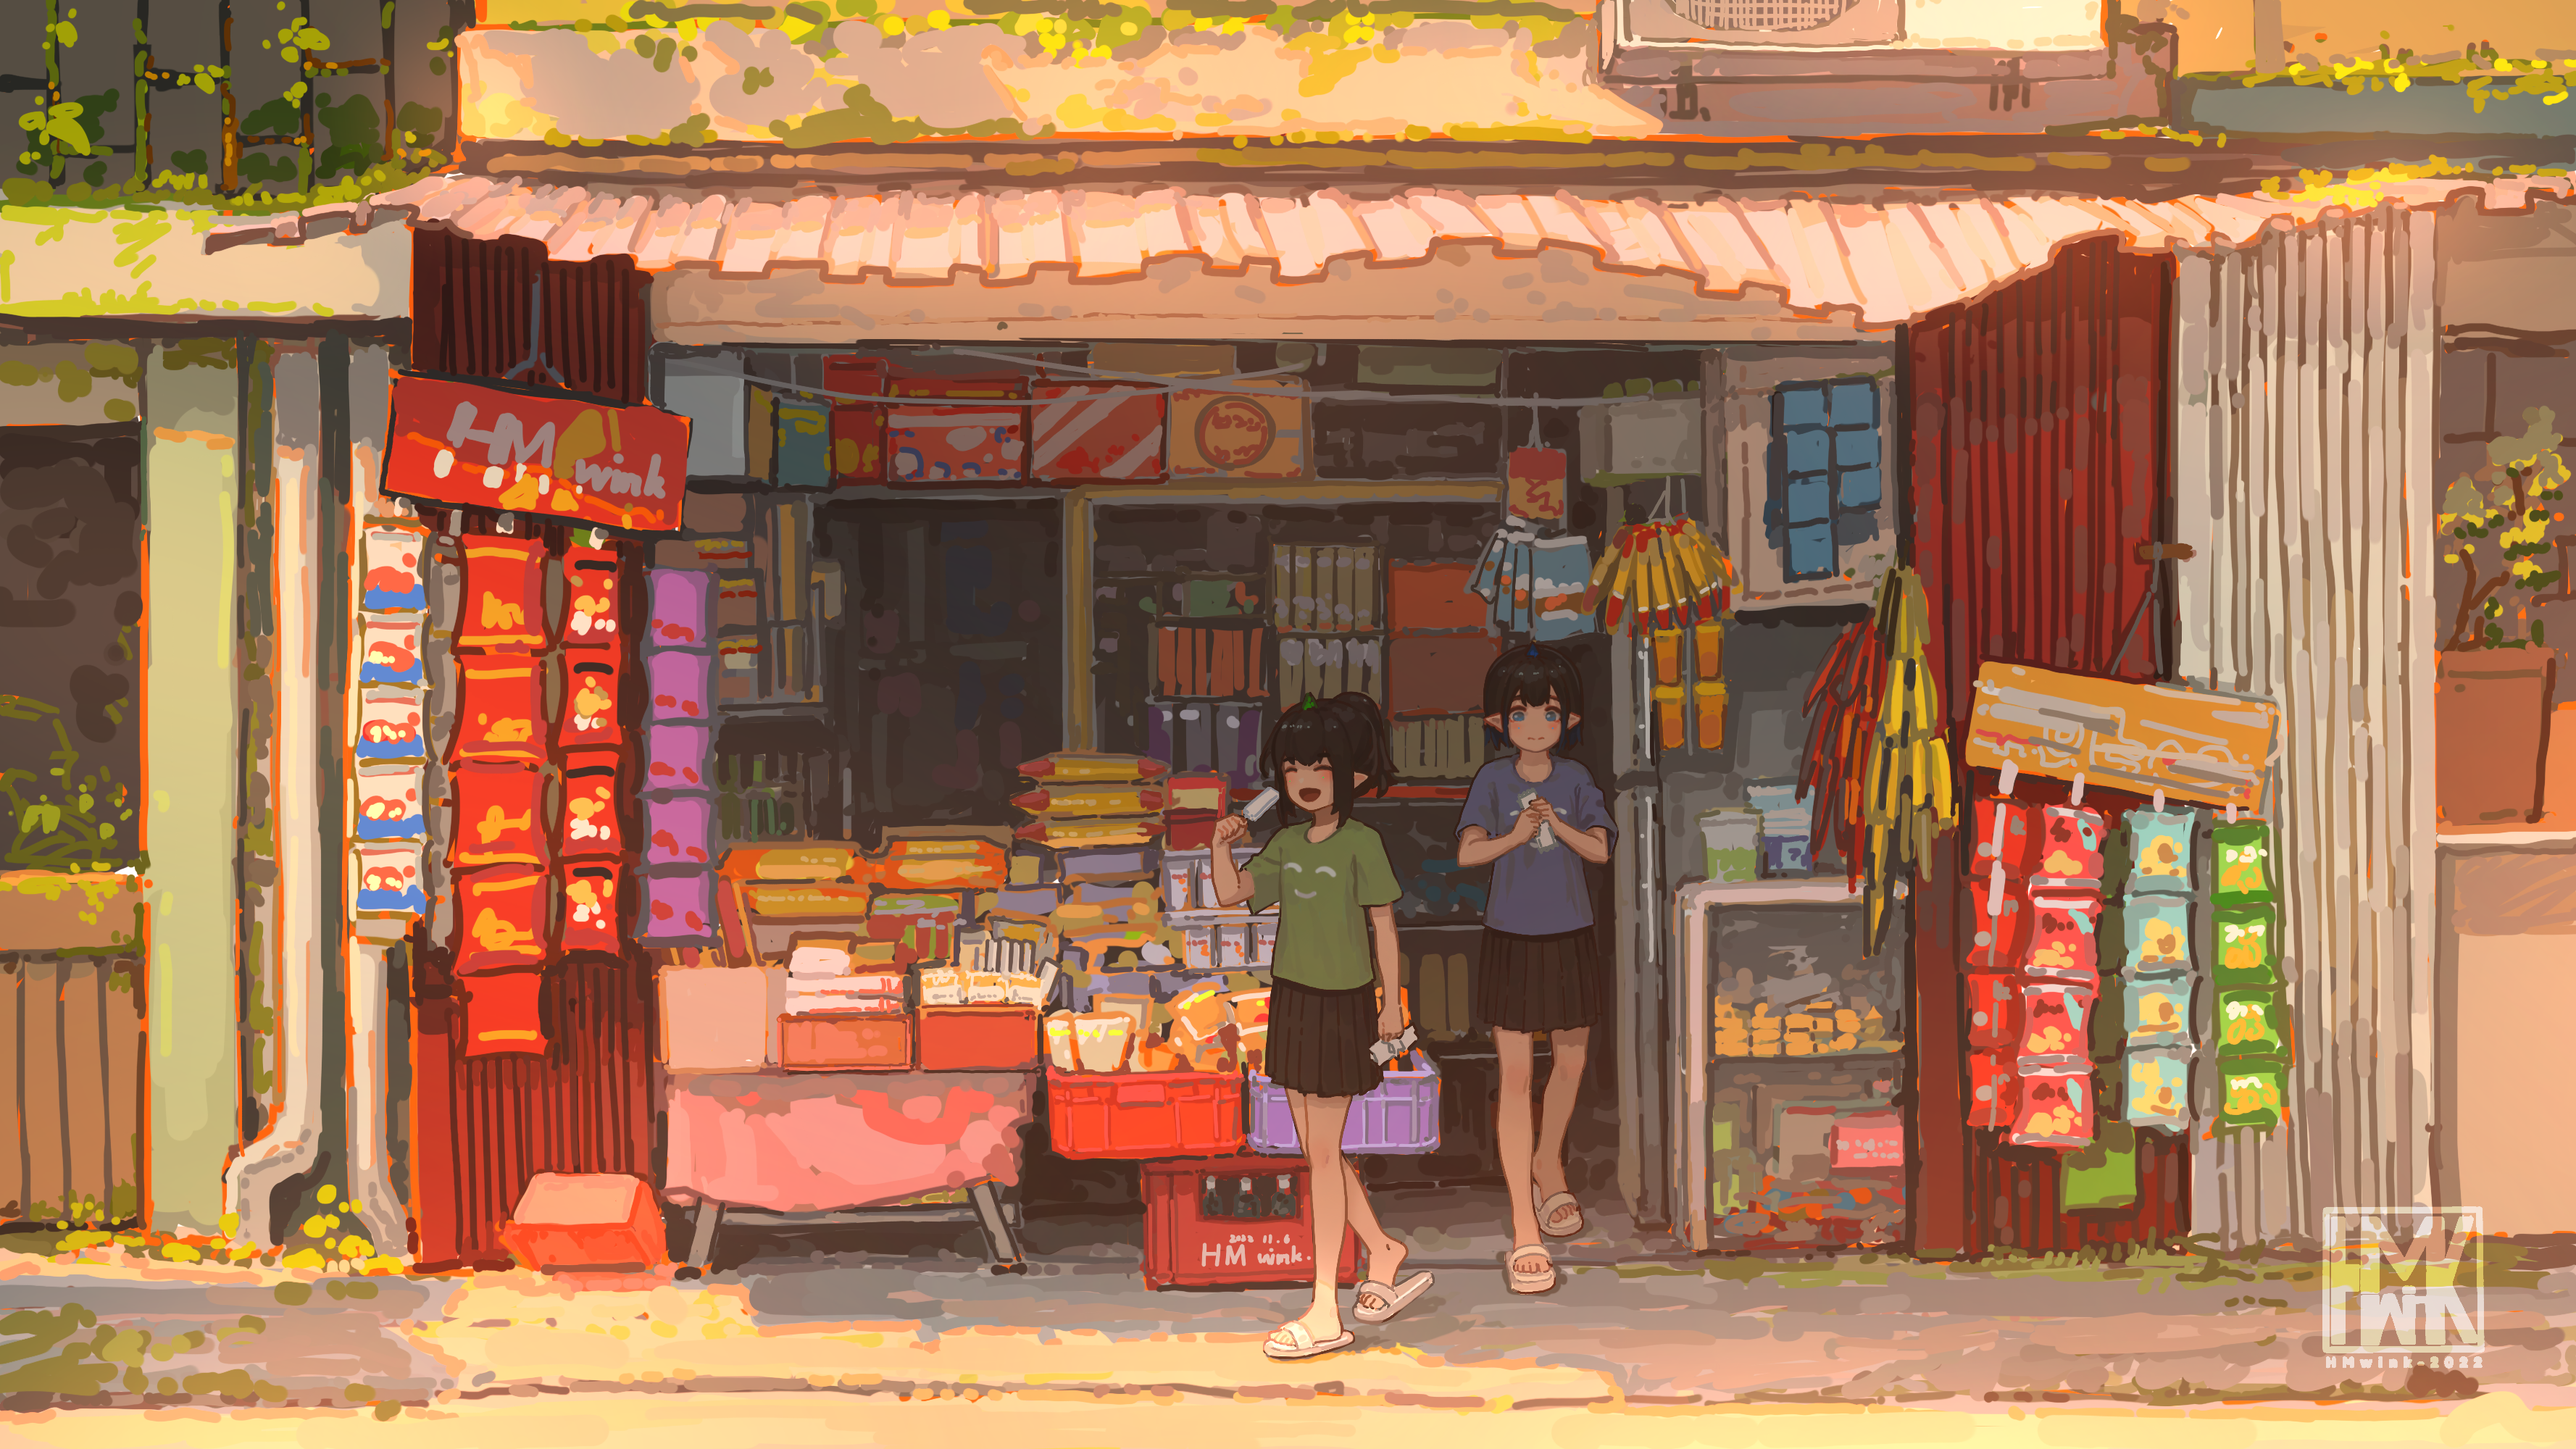 Hua Ming Wink Anime Girls Pointy Ears Closed Eyes Popsicle Walking Store Front Watermarked Digital A 3555x2000